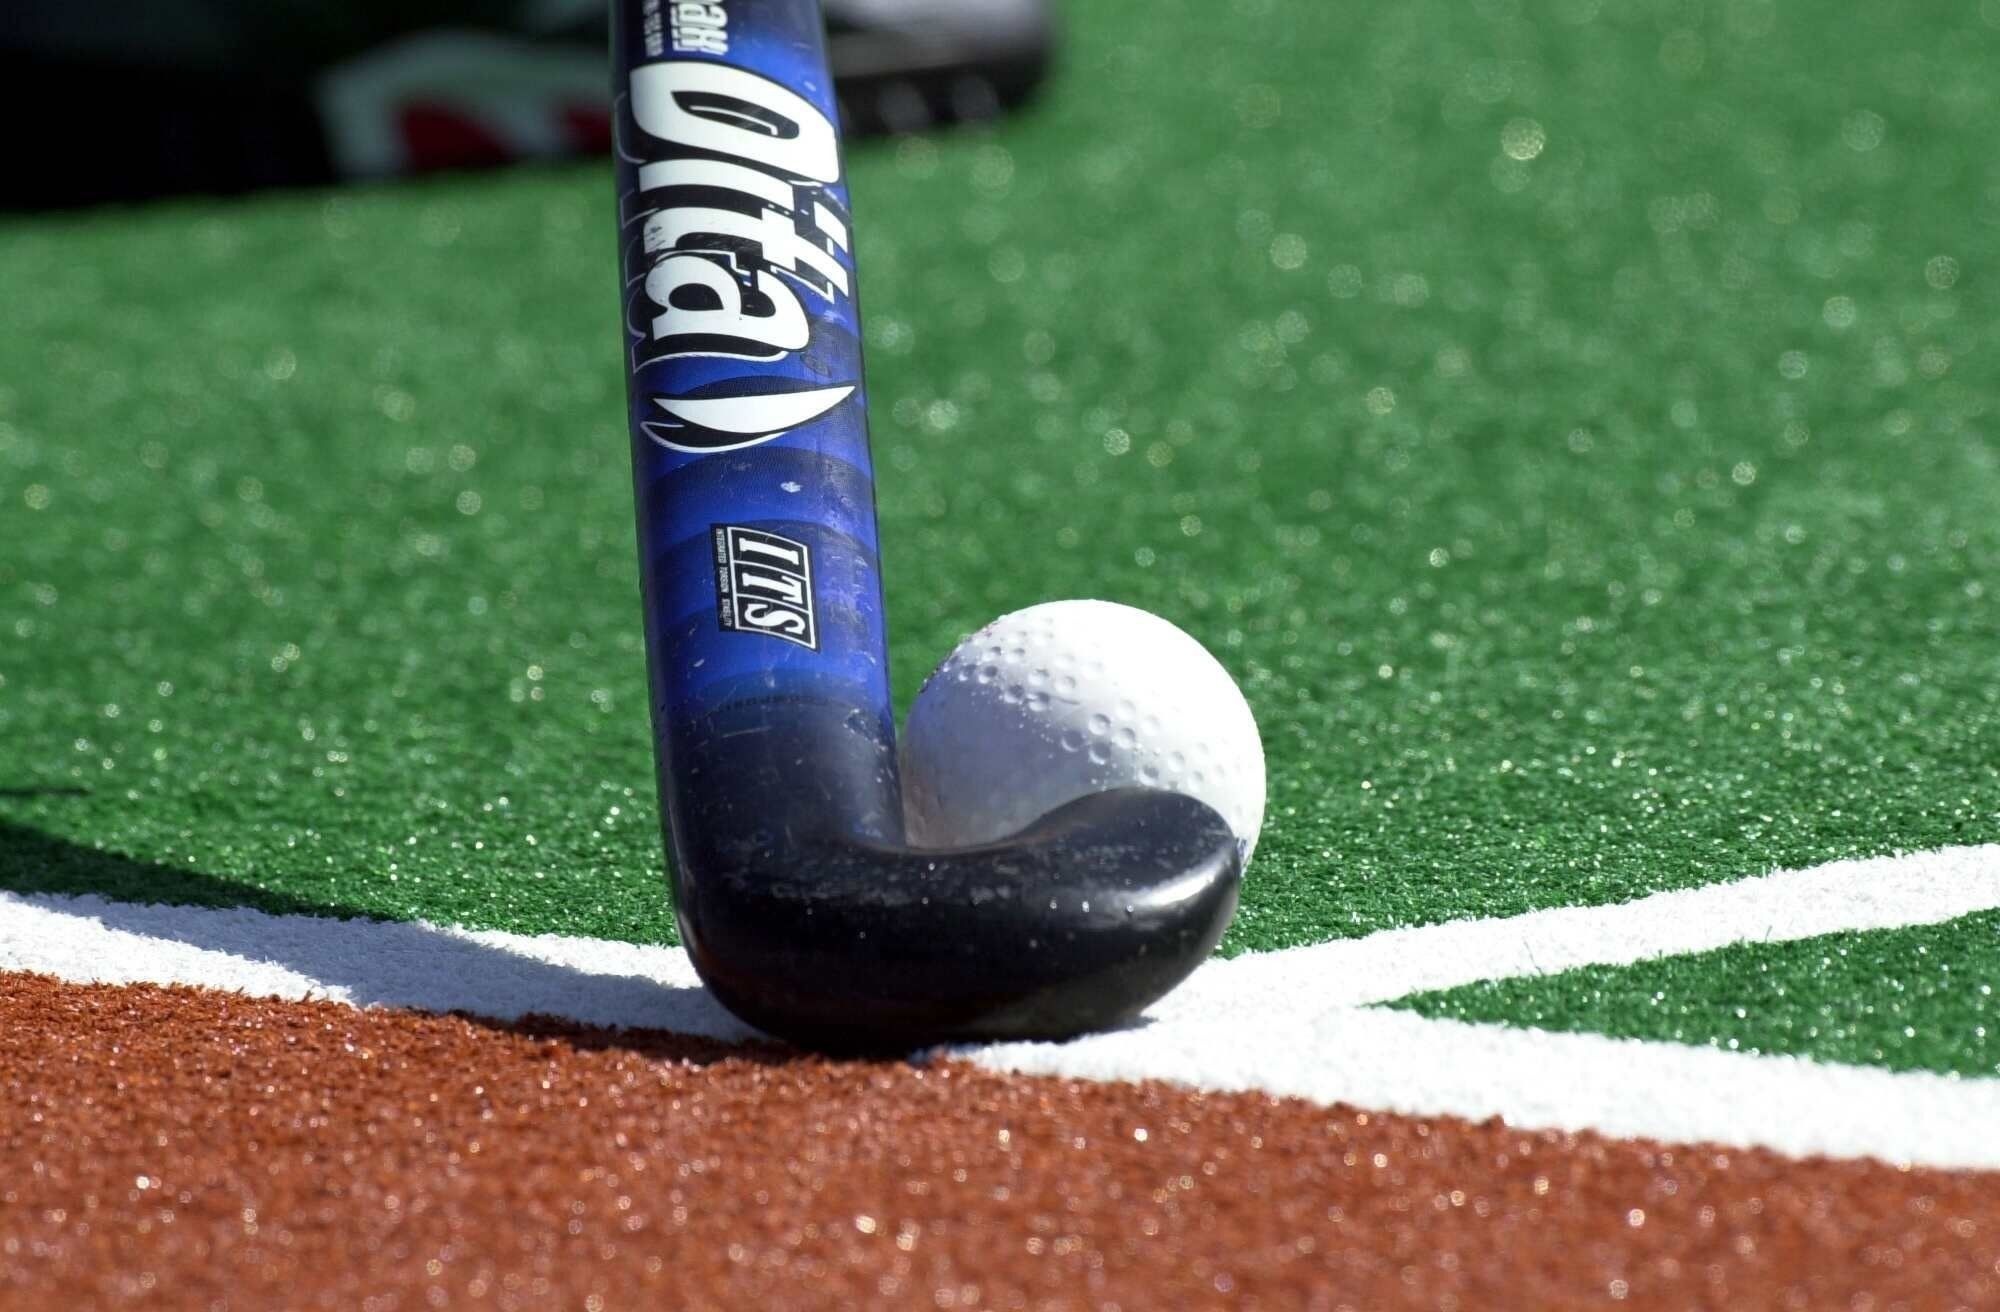 Field Hockey: A stick and a ball - equipment for a competitive ball sport. 2000x1320 HD Wallpaper.